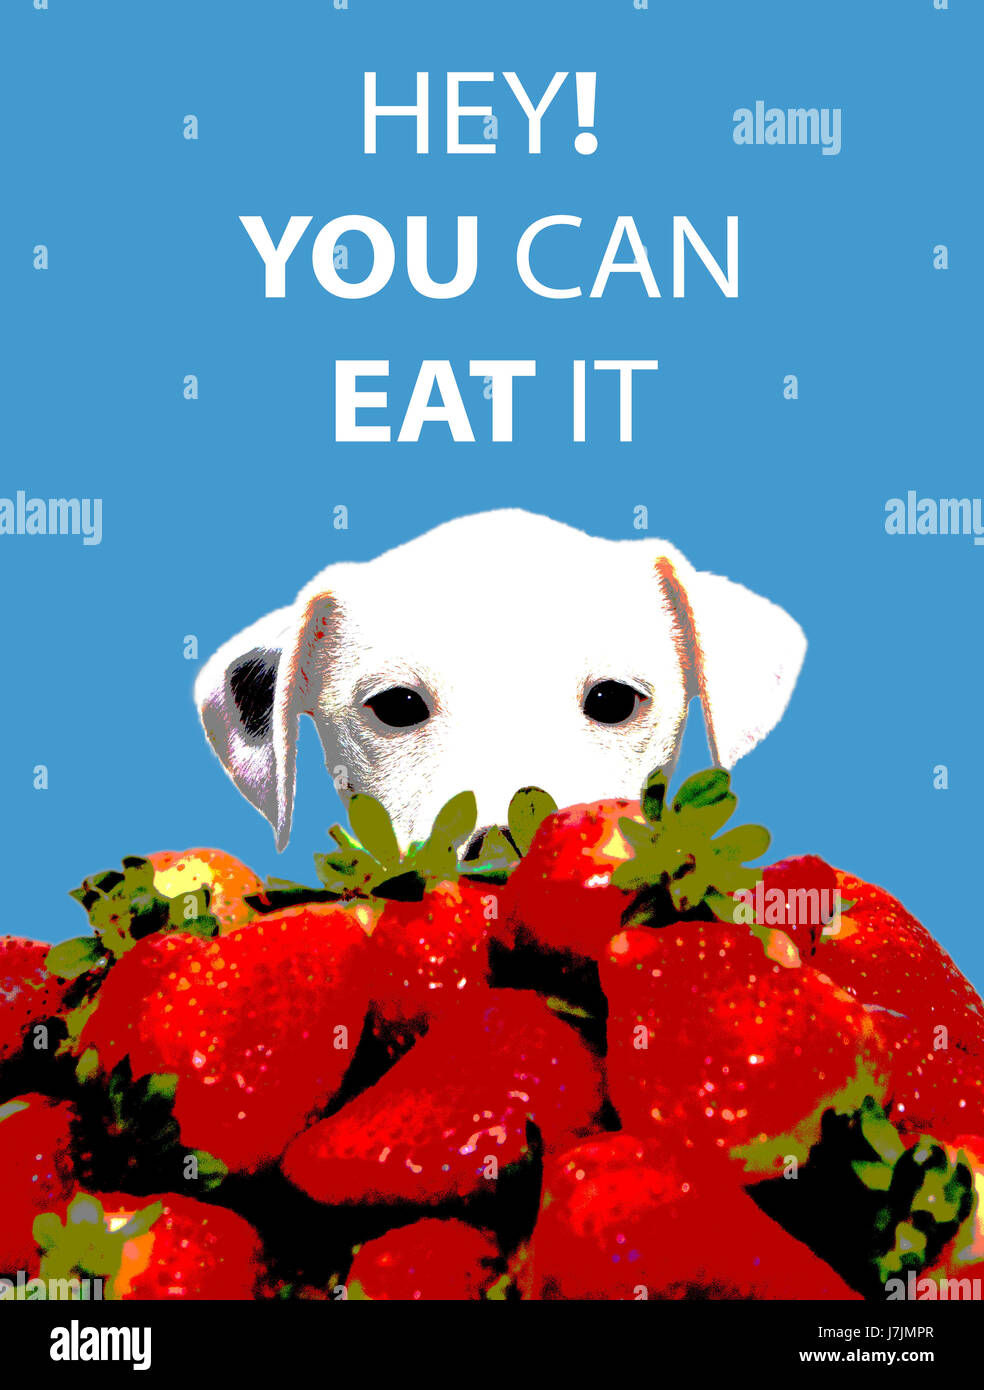 Hey! You Can Eat It Poster starring a white puppy and strawberries Stock Photo